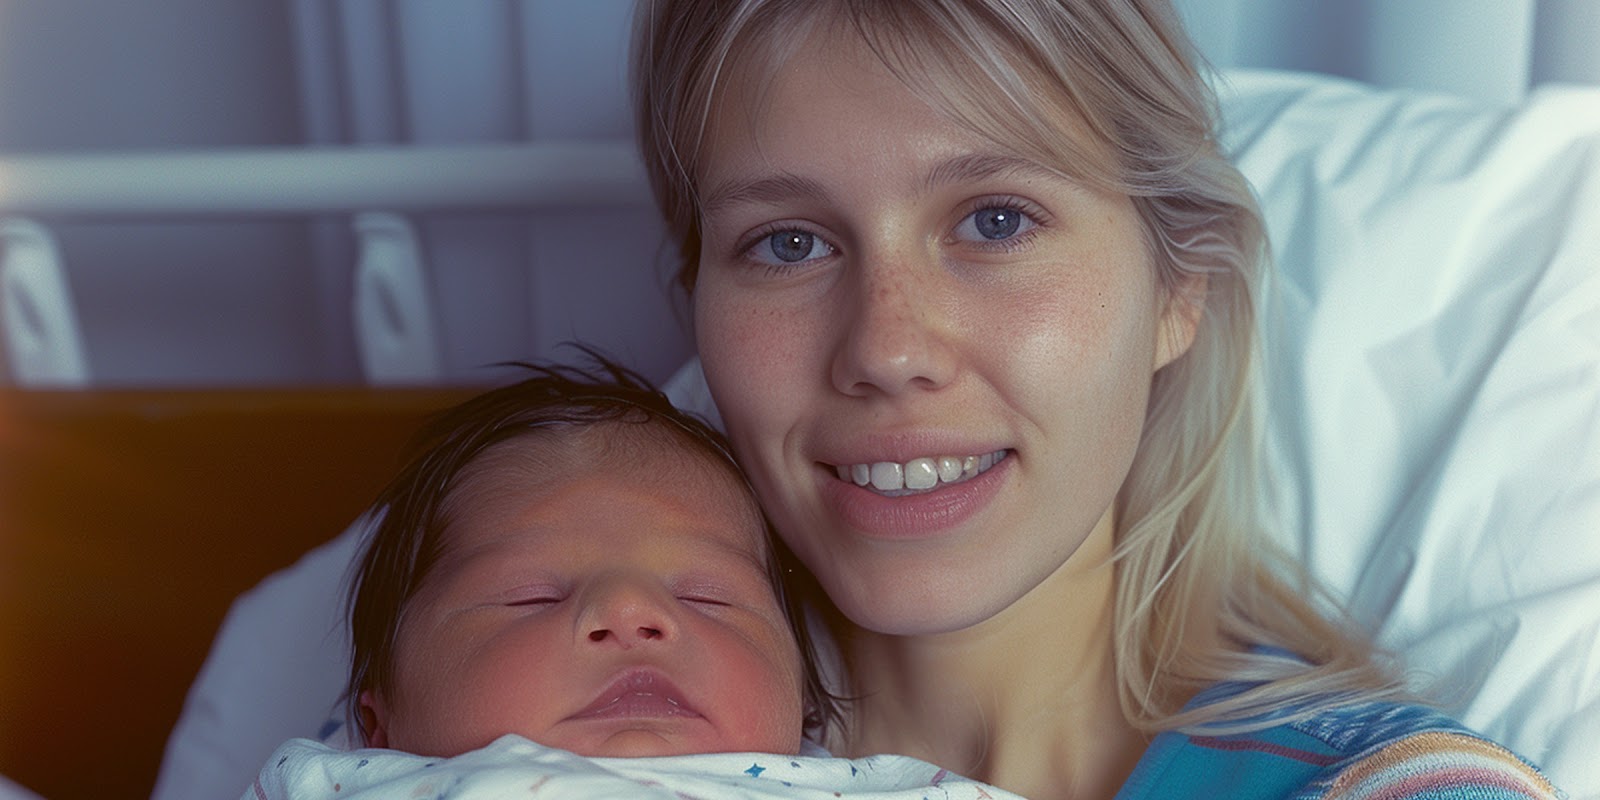 A woman with a newborn baby | Source: Midjourney